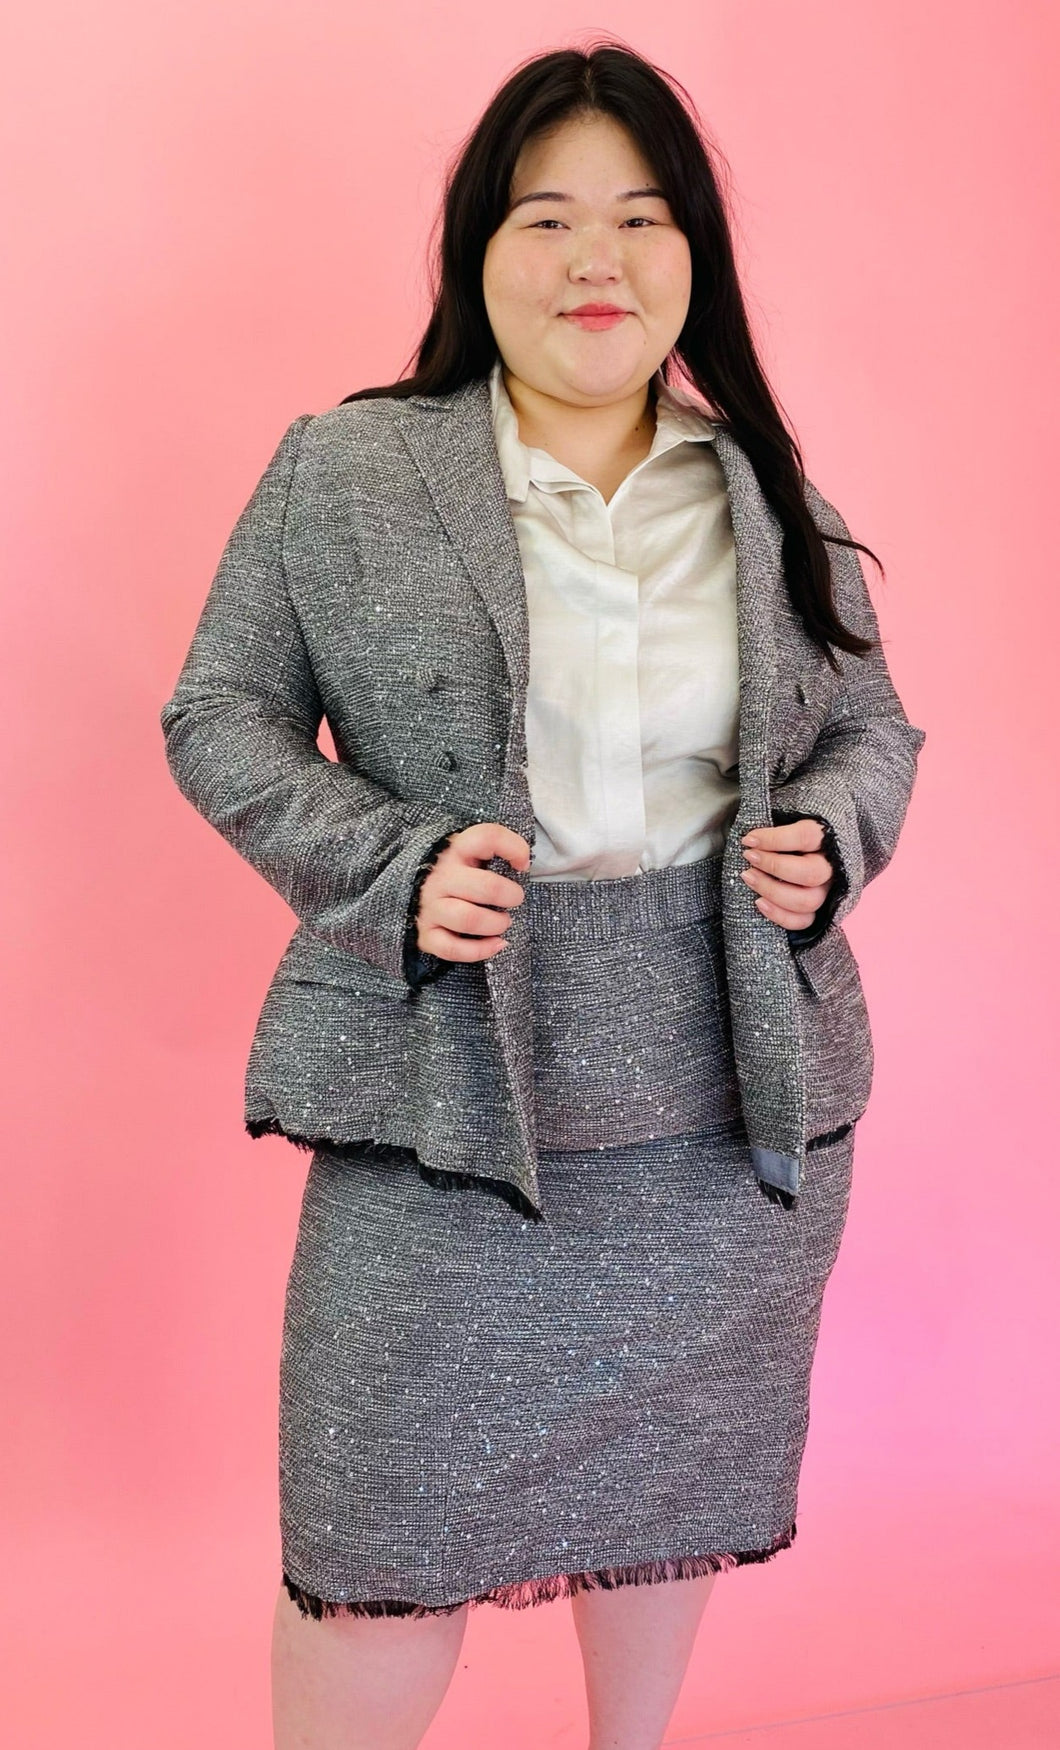 Front view showing off the fit at the torse of a size 18 Lela Rose gray tweed, textured blazer and skirt 2-piece suit set with black unfinished fringe hem styled with an off-white button-up top on a size 14/16 model.